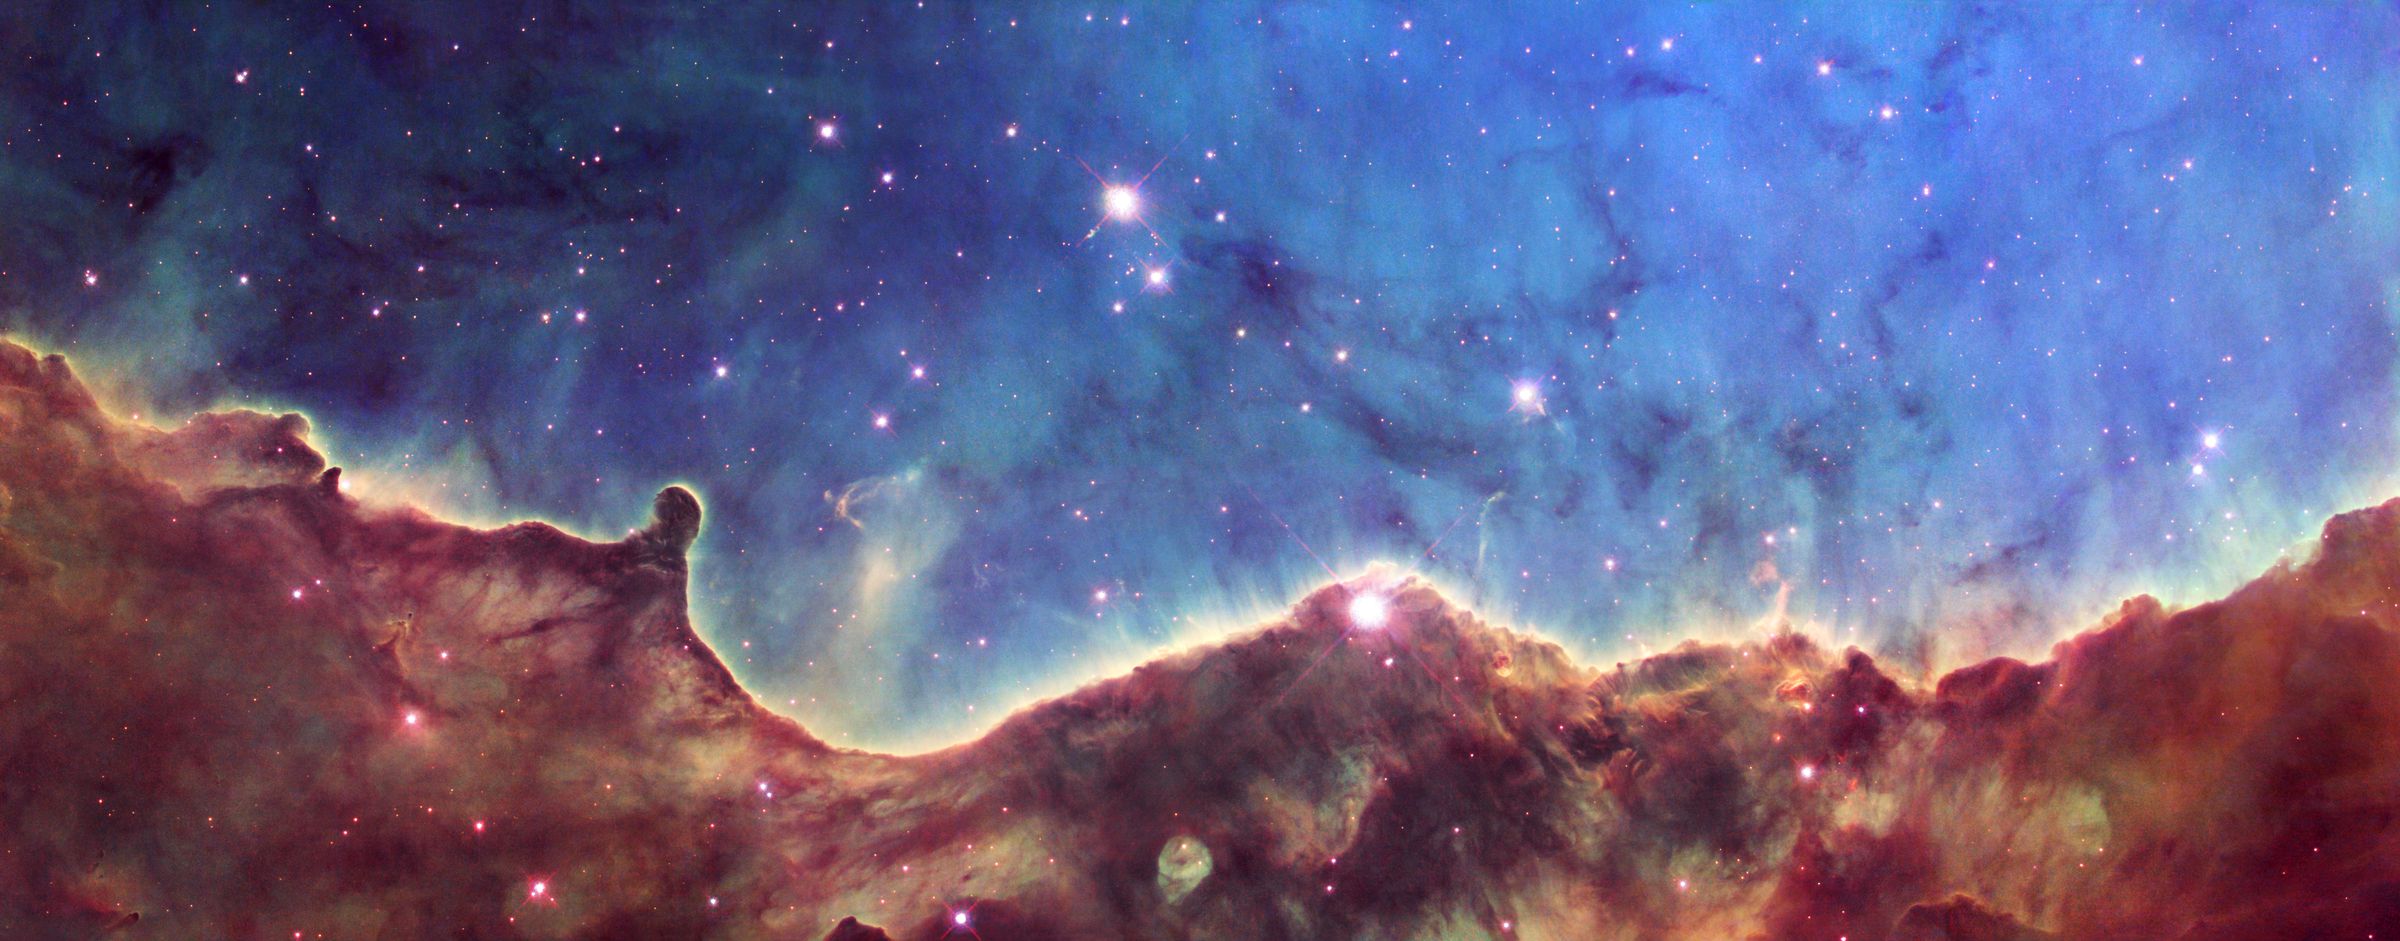 The Hubble’s view of the Carina Nebula